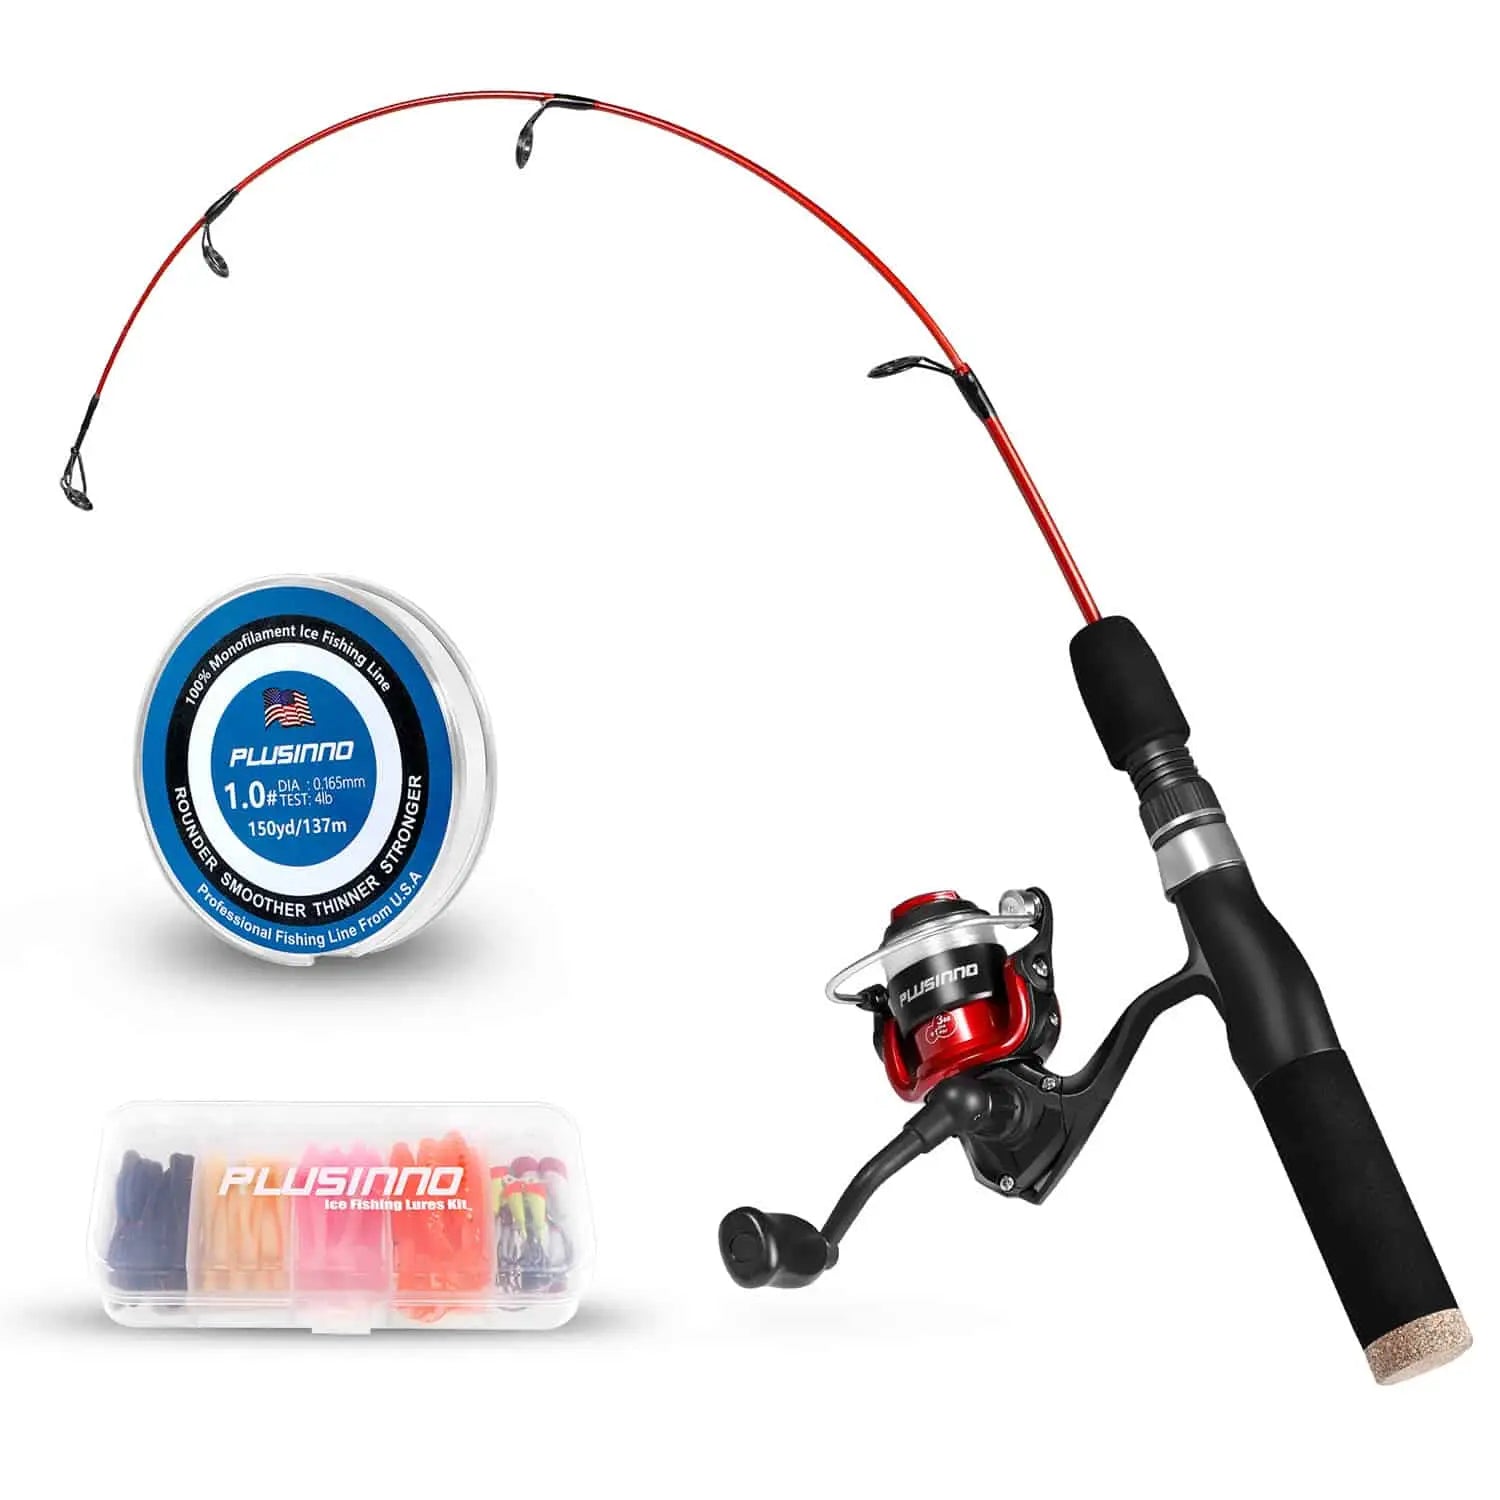 2 NEW ICE FISHING RODS HT POLAR FIRE RED ZONE Spinning Combos 26